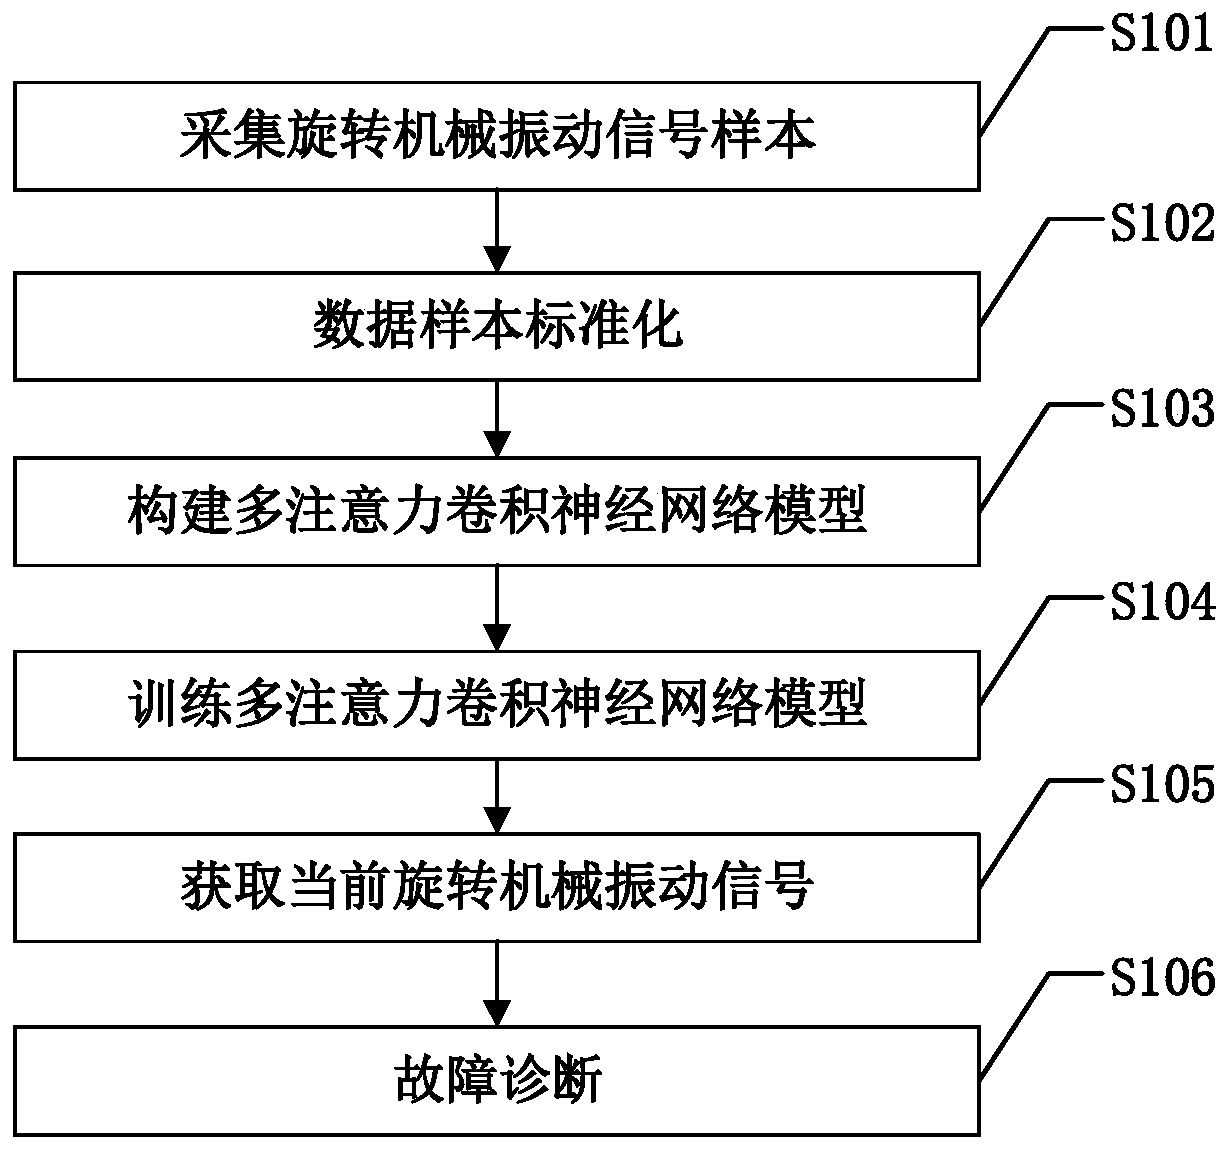 Rotating machinery fault diagnosis method based on multi-attention convolution neural network